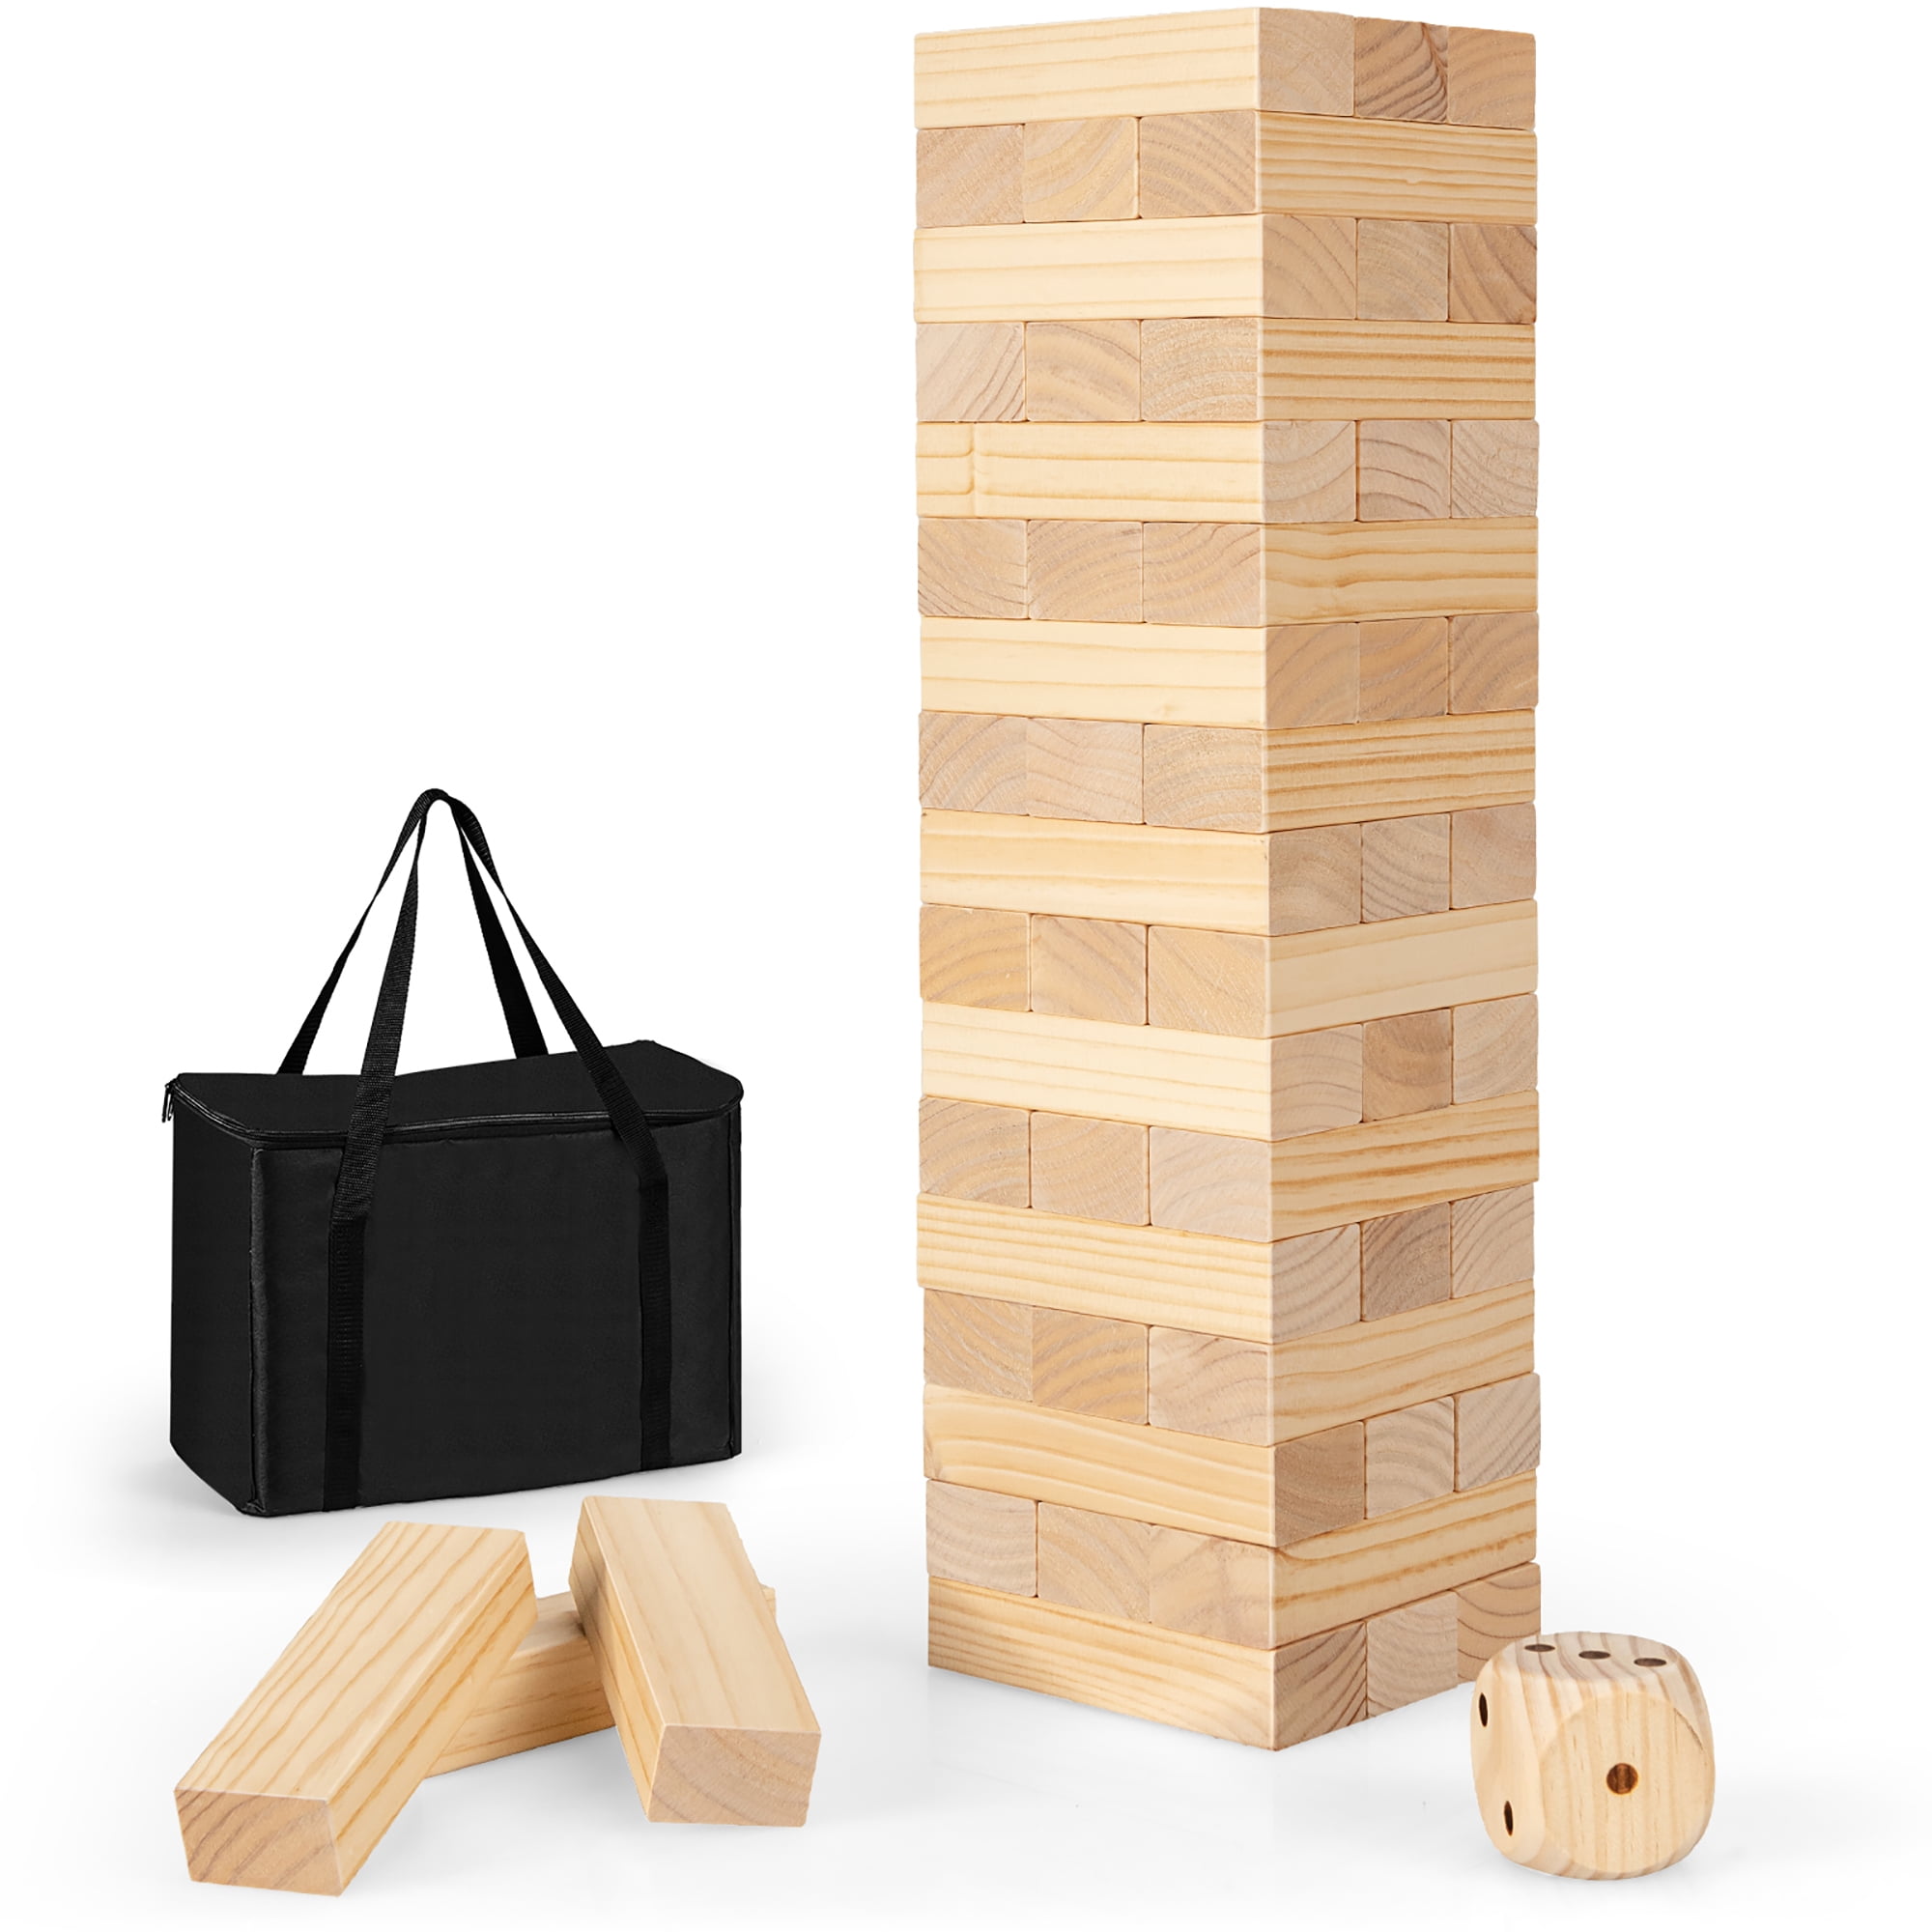 Fun 6 Inch Small Toppling Tower Wood Block Stacking Game for Kids Wooden Tower Game Tumbling Tower Blocks 